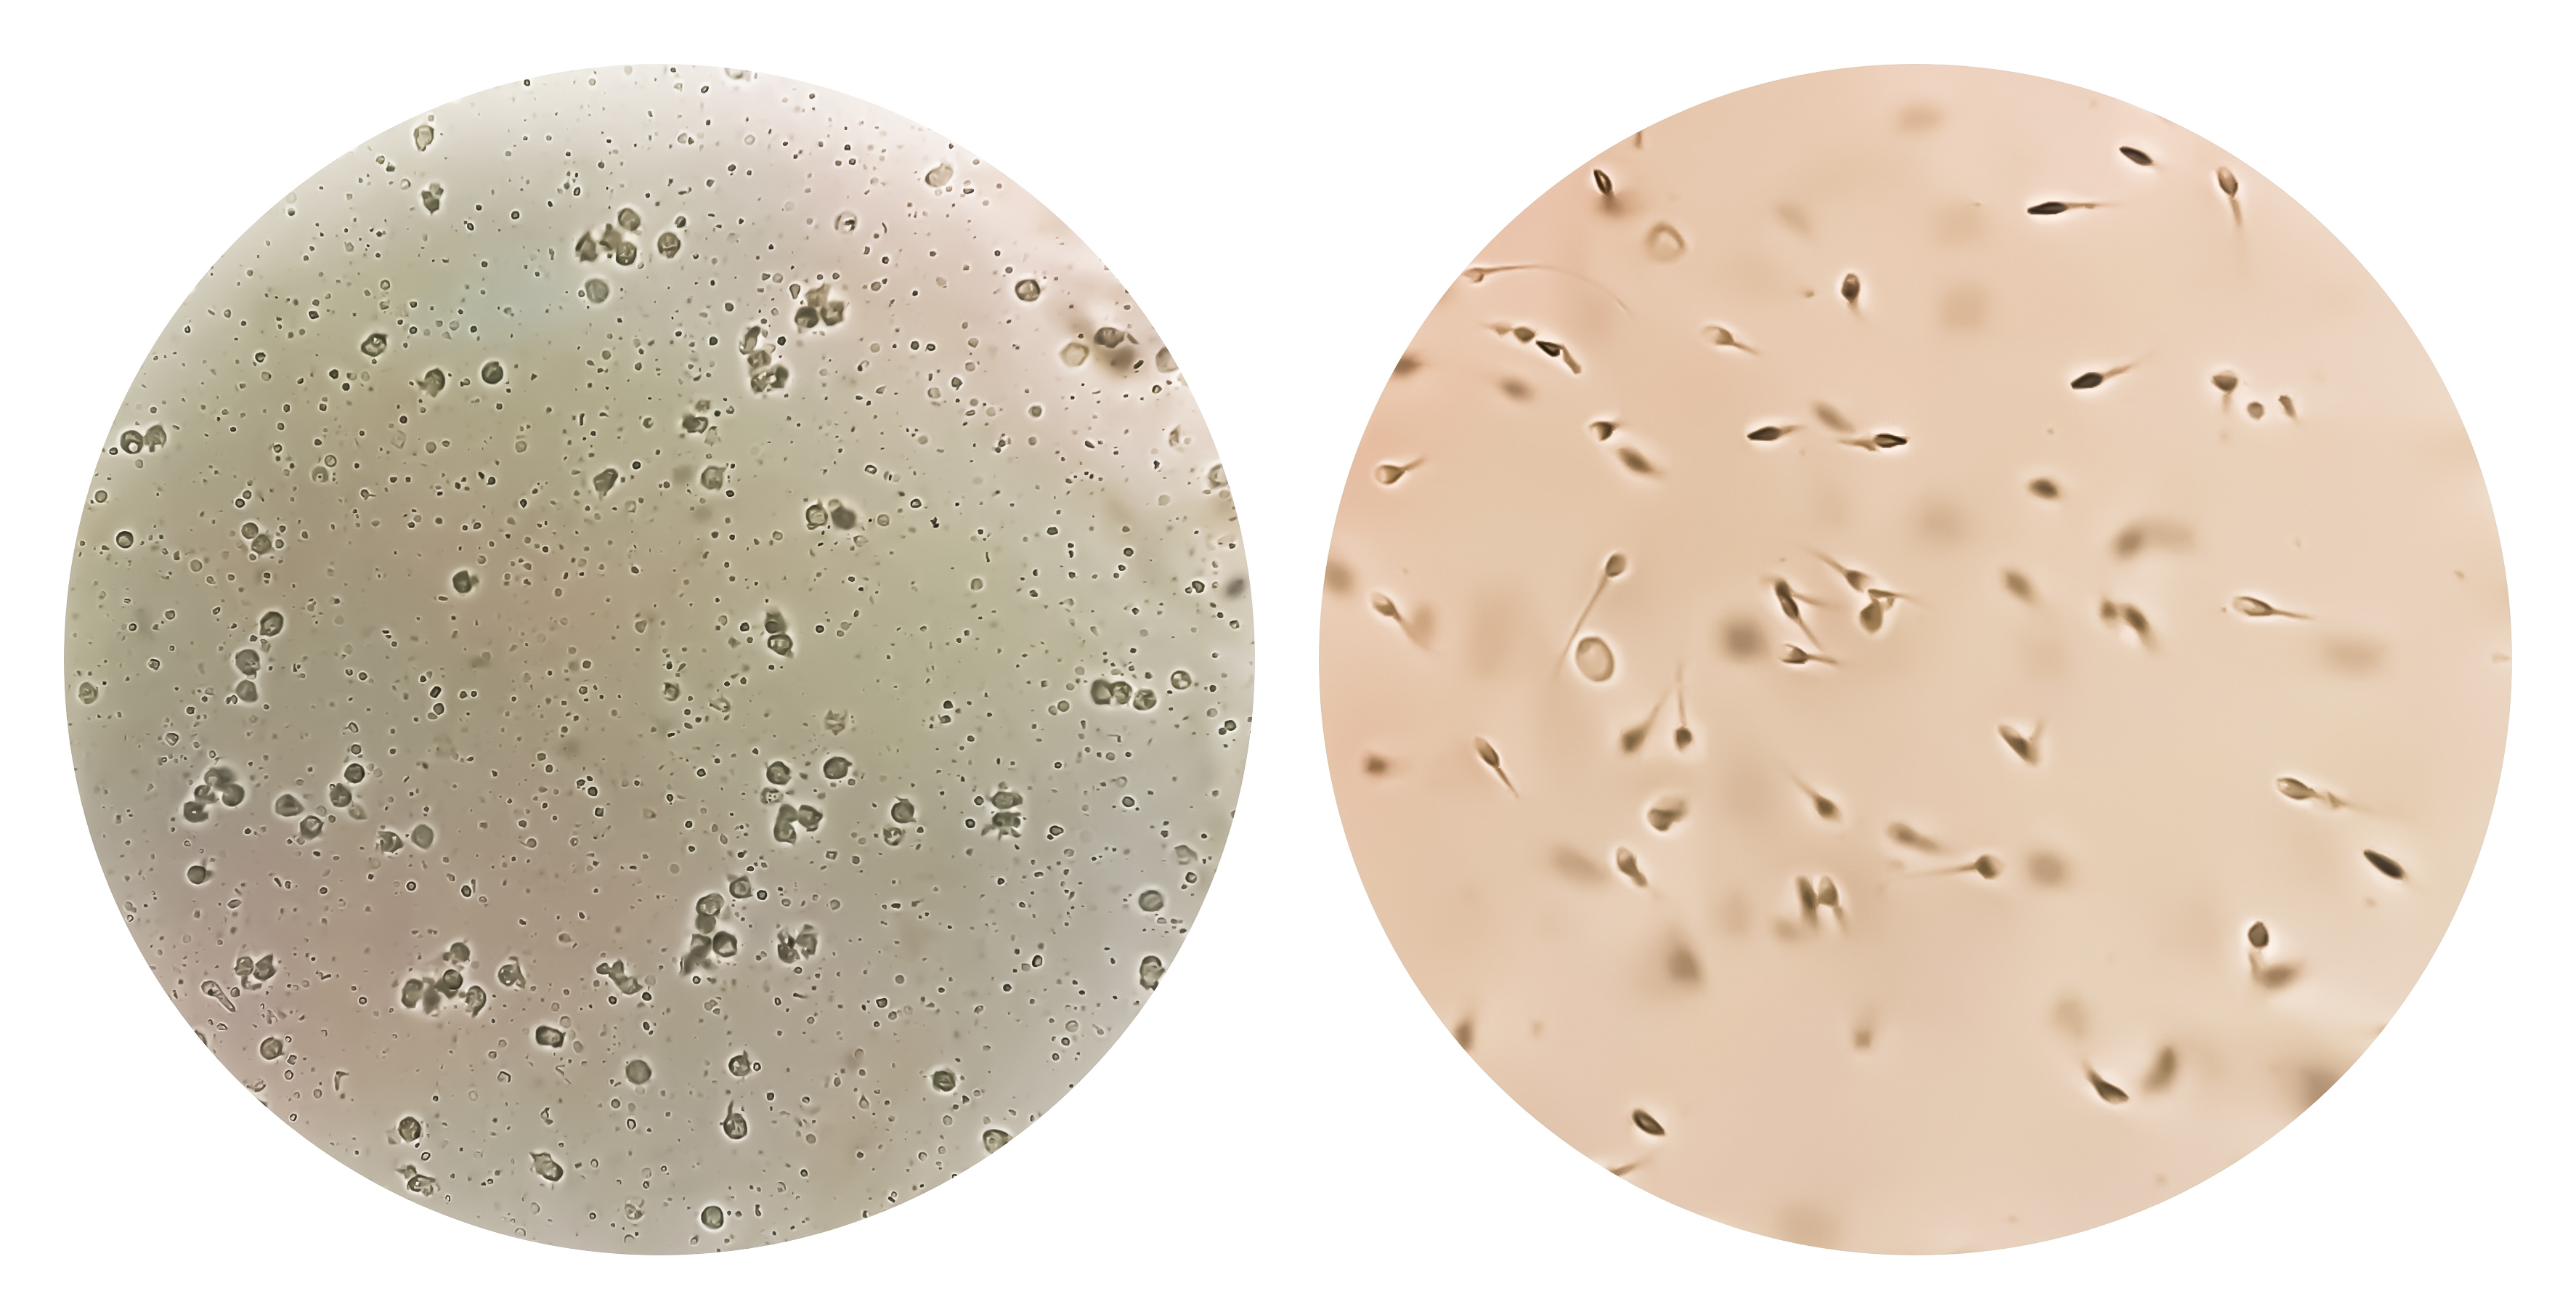 Semen analysis. The left one is showing Azoospermia with plenty pus cells the right is showing Normospermia (normal sperm).